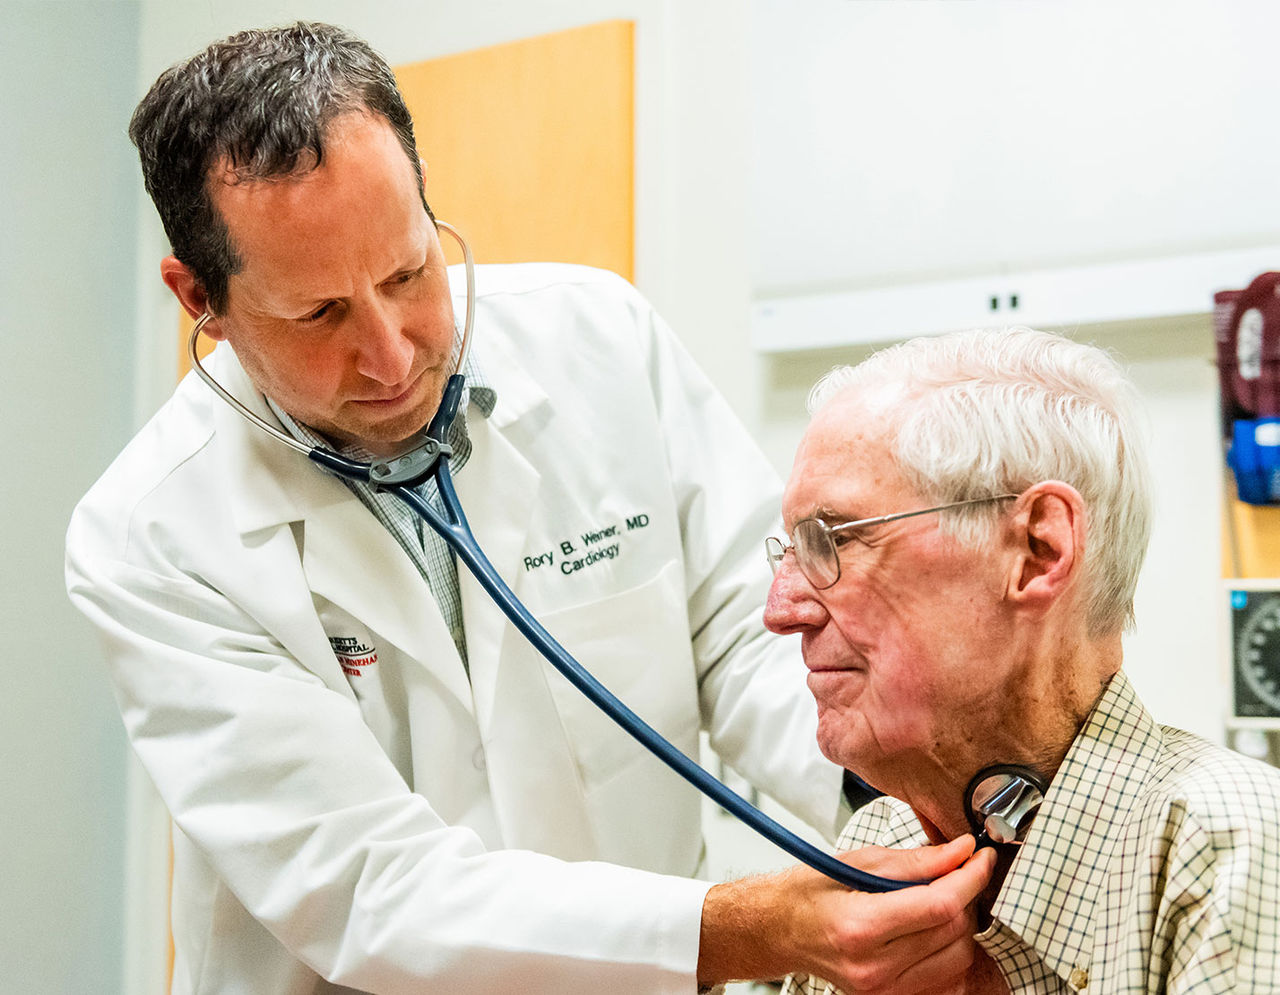 male provider using stethescope on neck of older male patient in exam room